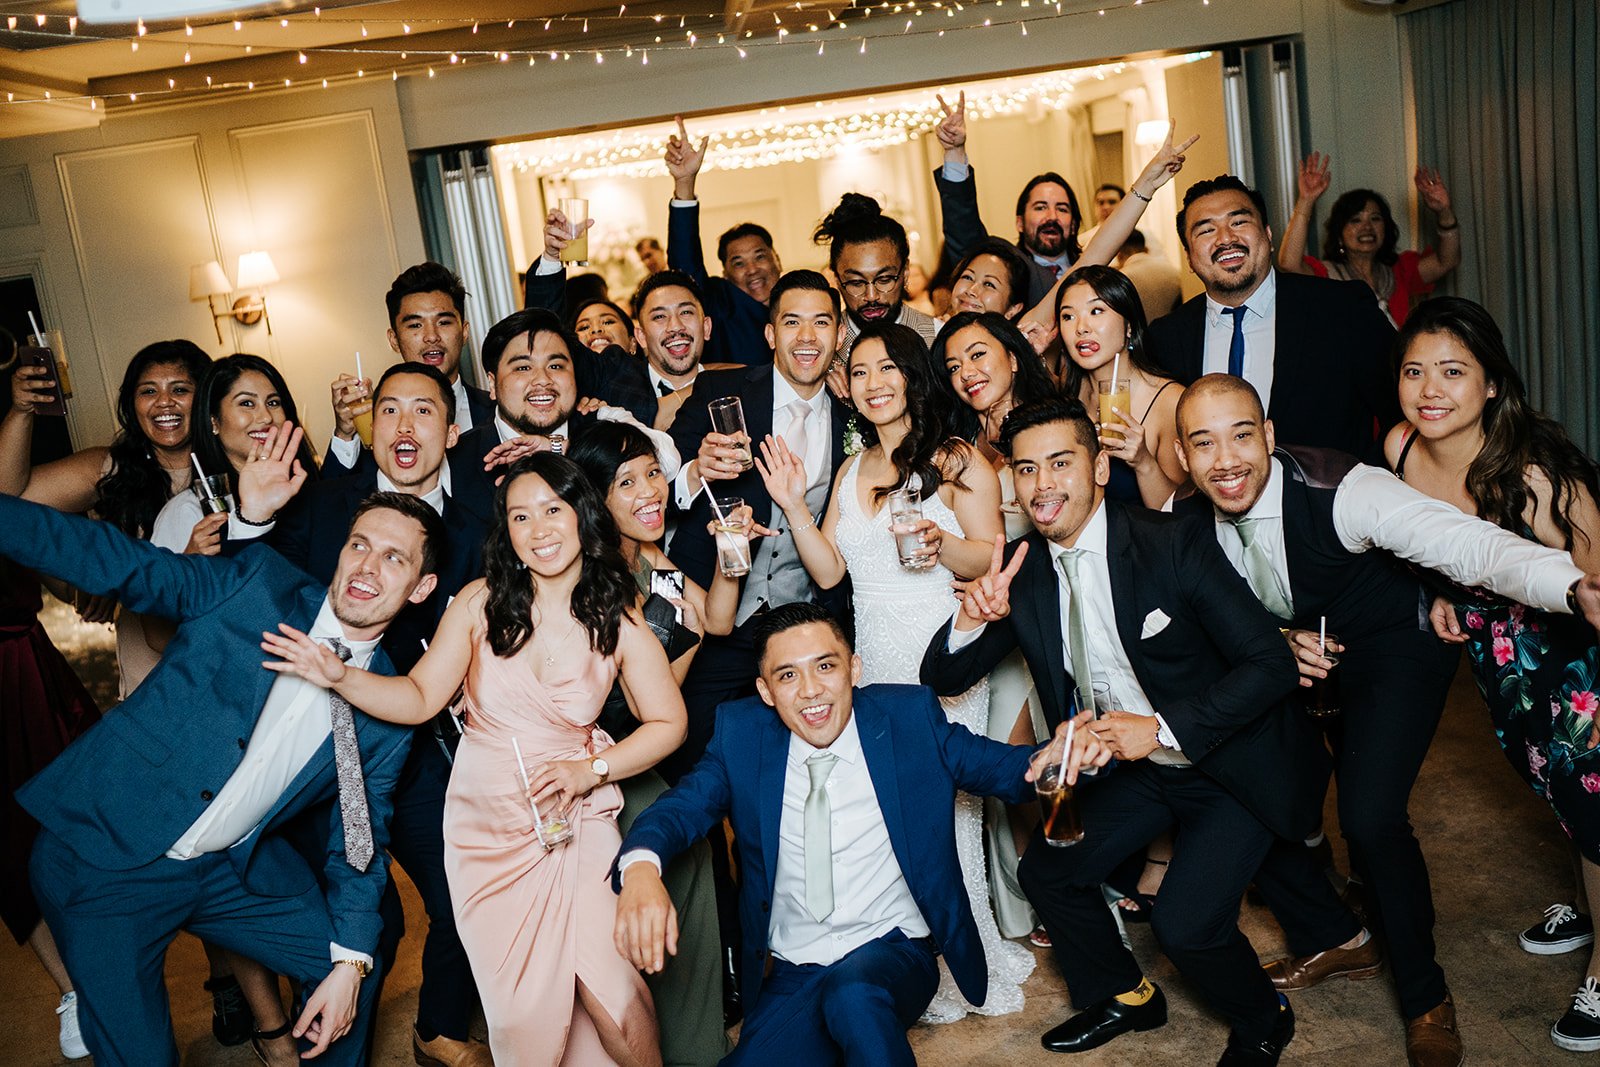 Group photograph on dancefloor of bride, groom and their closest friends enjoying the evening party at Bingham Riverhouse wedding